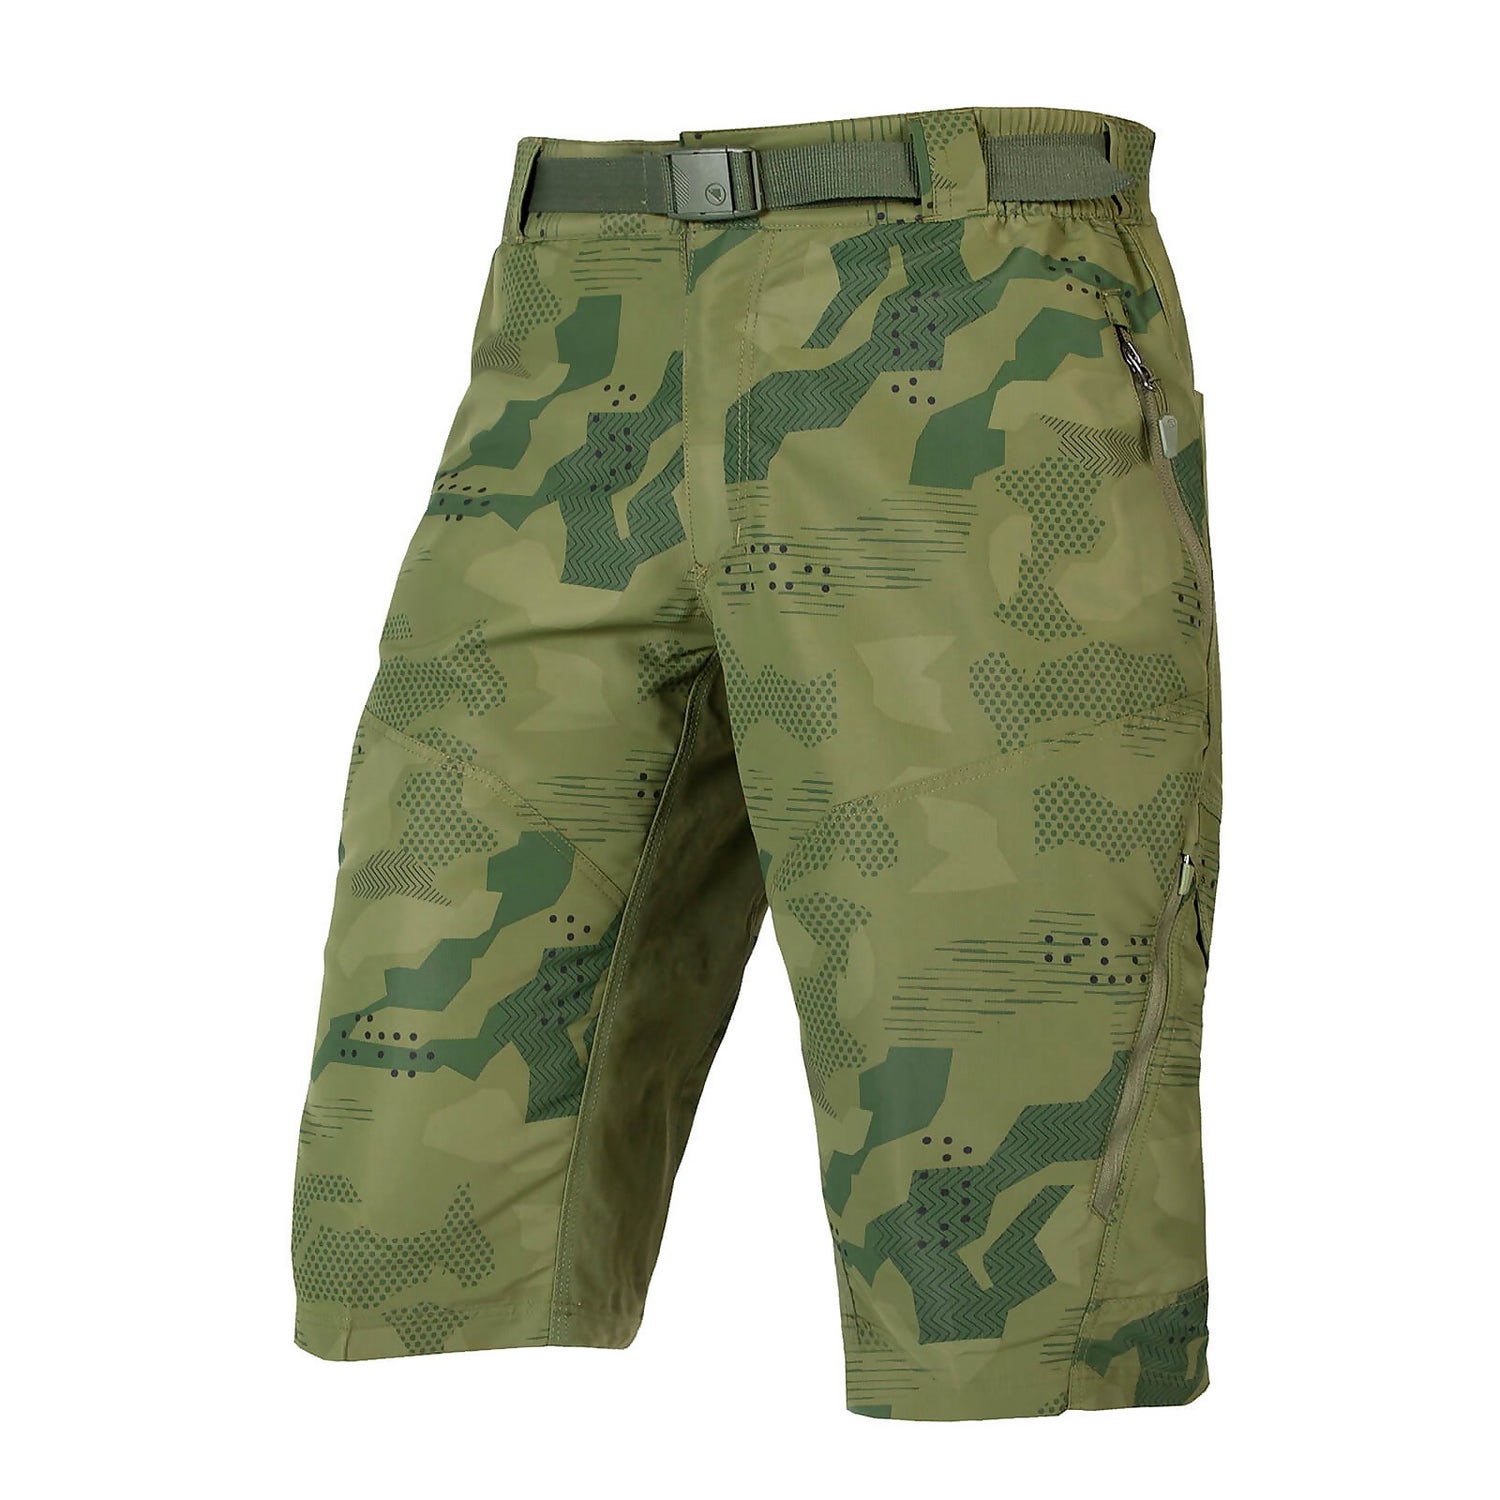 Hummvee Short with Liner - Green - L